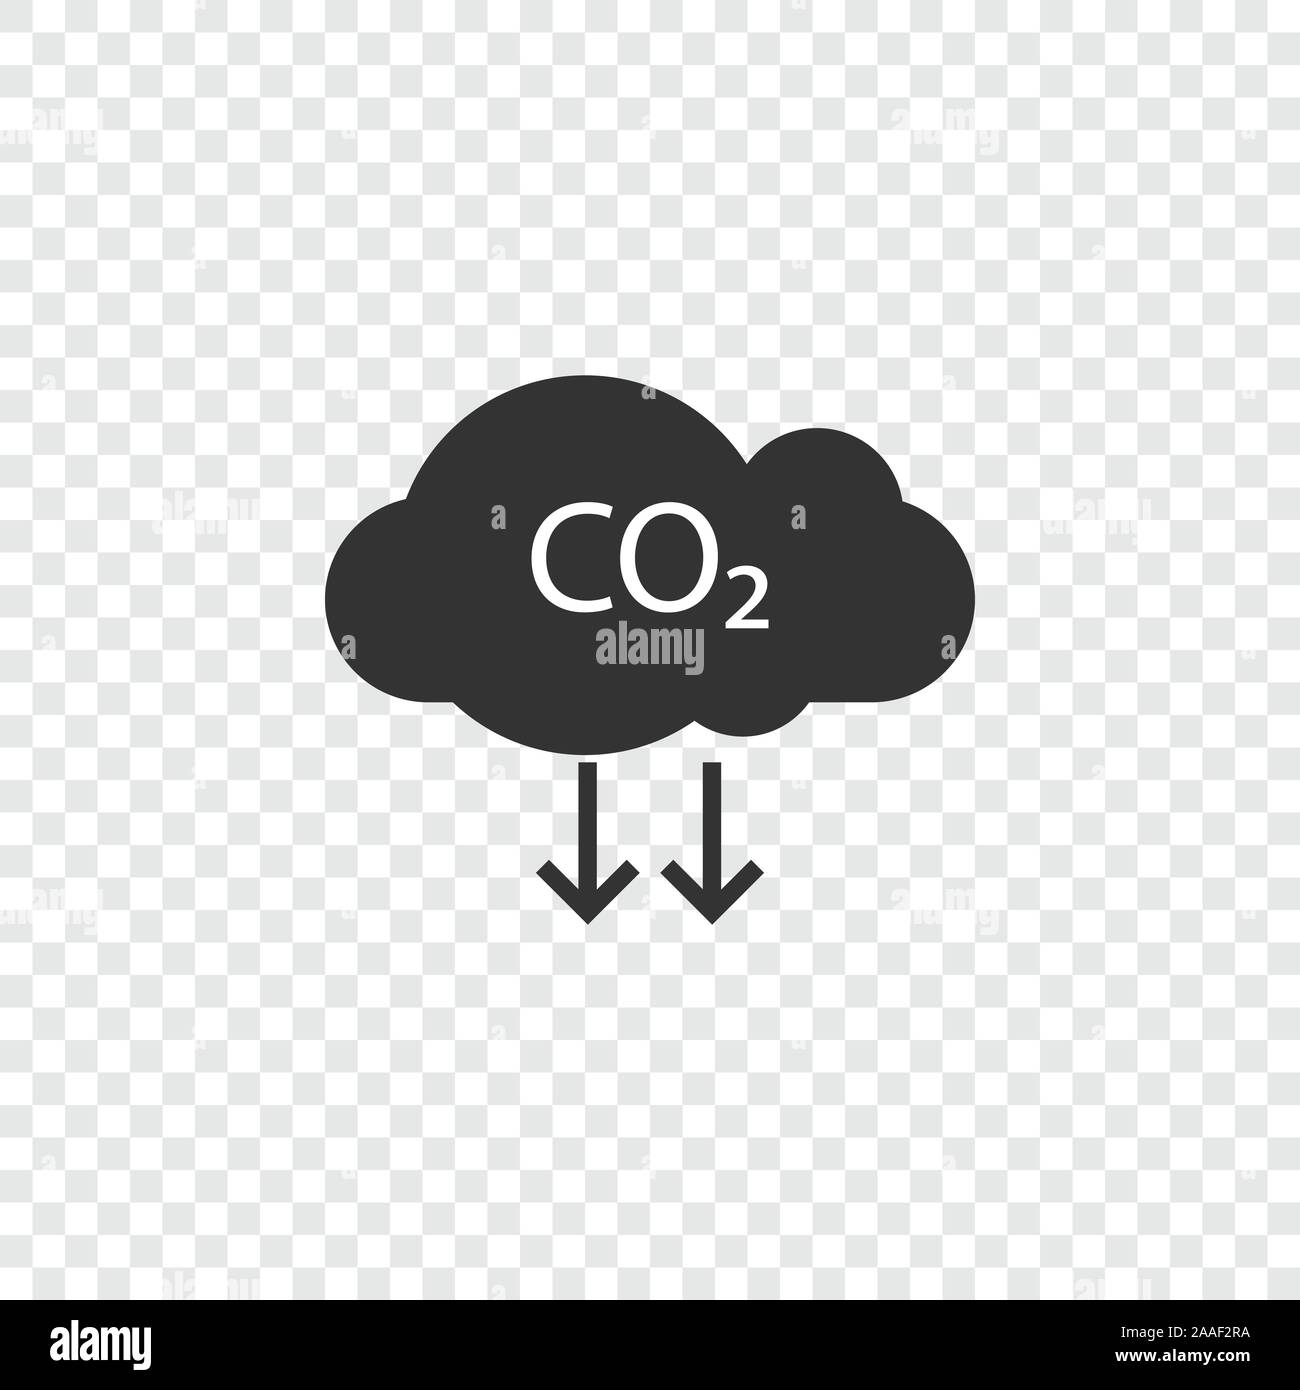 Co2, ecology, cloud icon. Vector illustration, flat design. Stock Vector